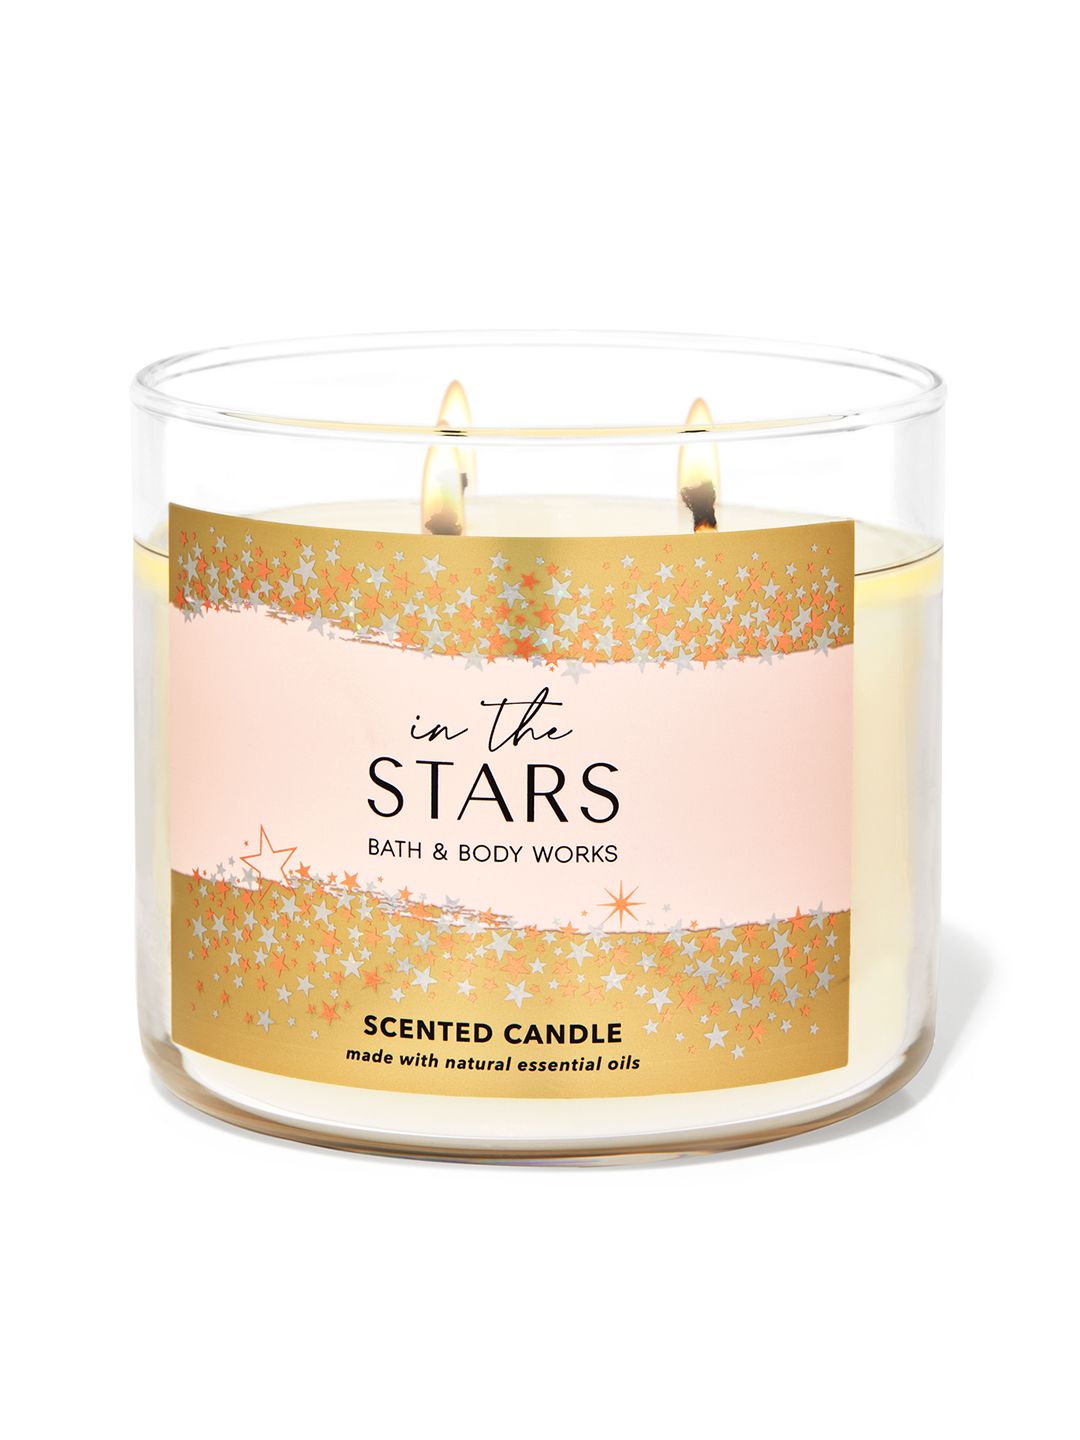 Bath & Body Works In the Stars 3-Wick Candle 411 g Price in India